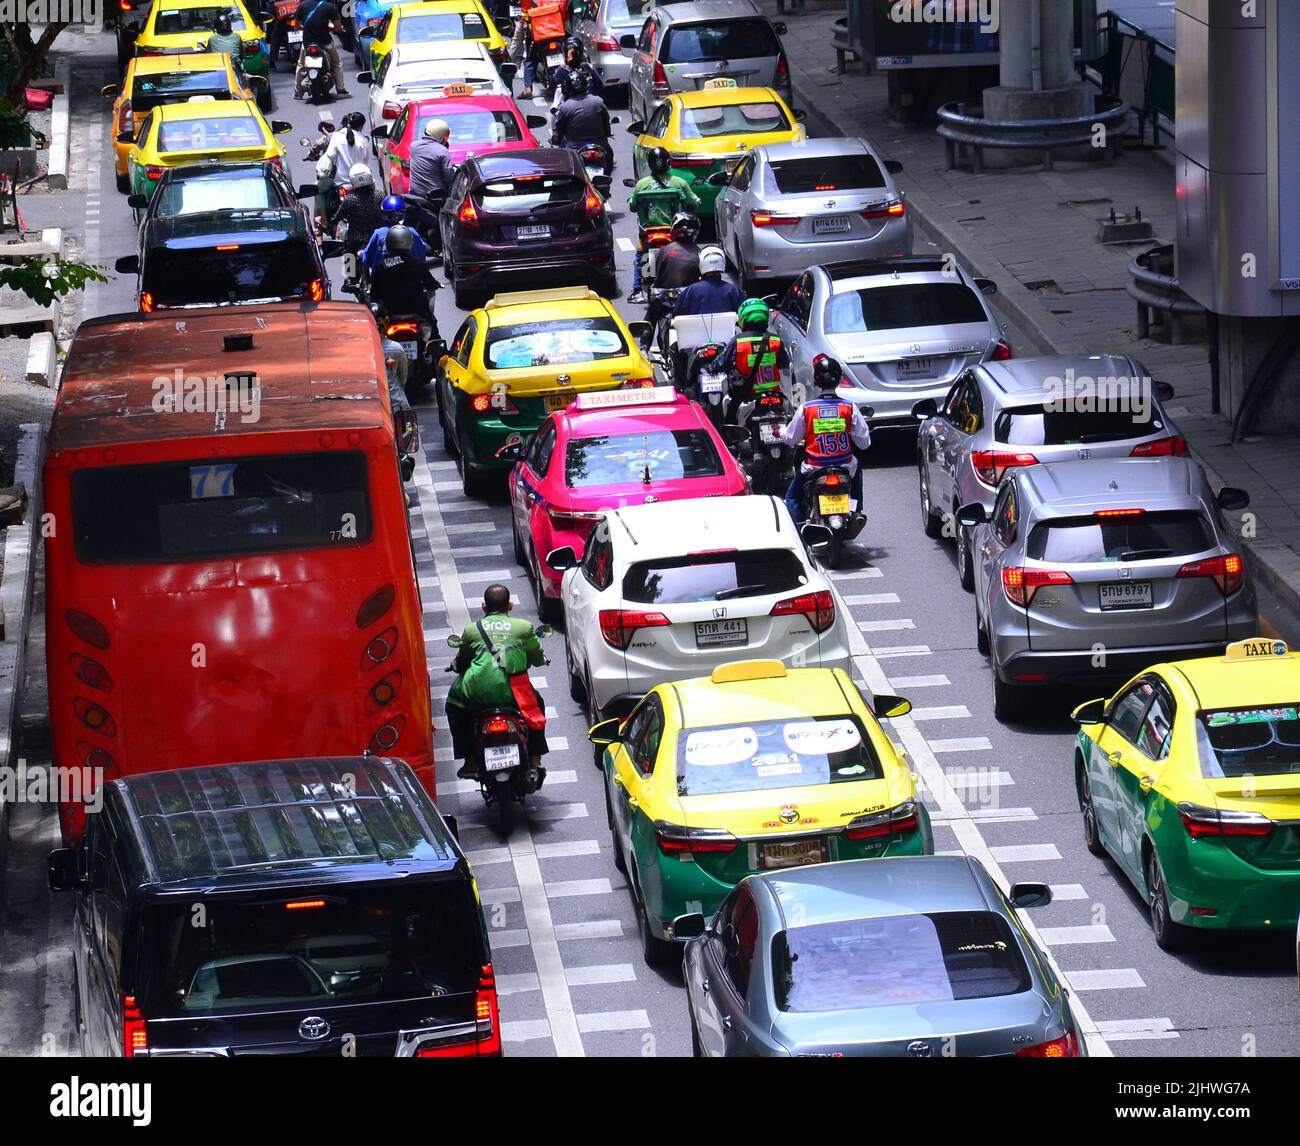 Traffic jam of cars, motorbikes and a bus on Silom Road, Bangkok, Thailand, Asia, as drivers of vehicles struggle to make progress in daytime busy traffic. Stock Photo